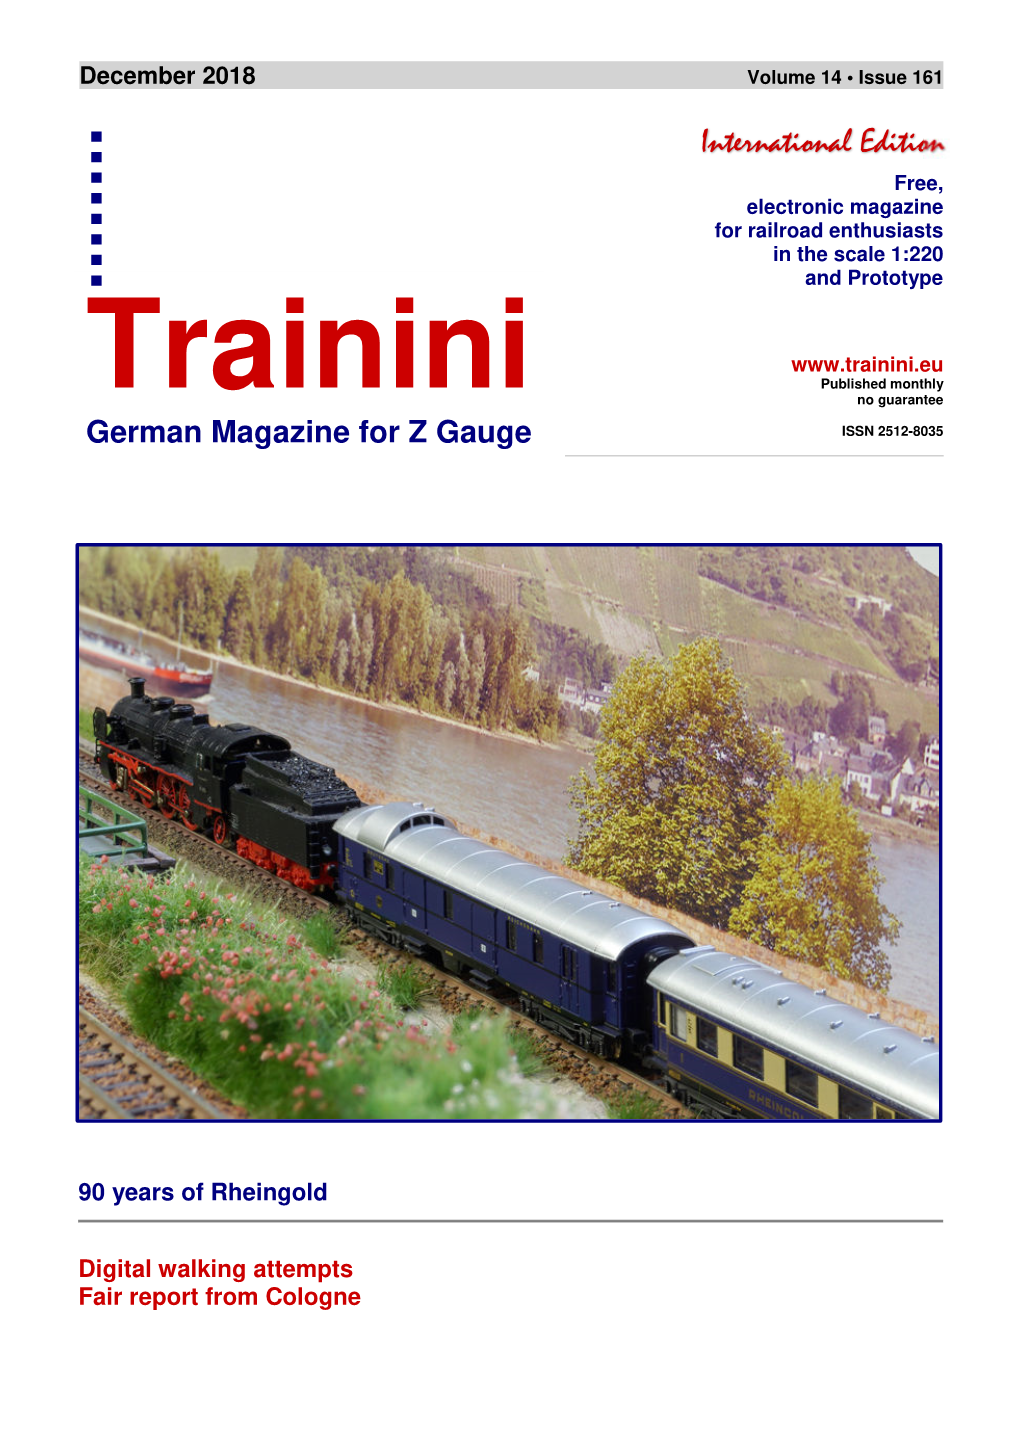 International Edition Free, Electronic Magazine for Railroad Enthusiasts in the Scale 1:220 and Prototype